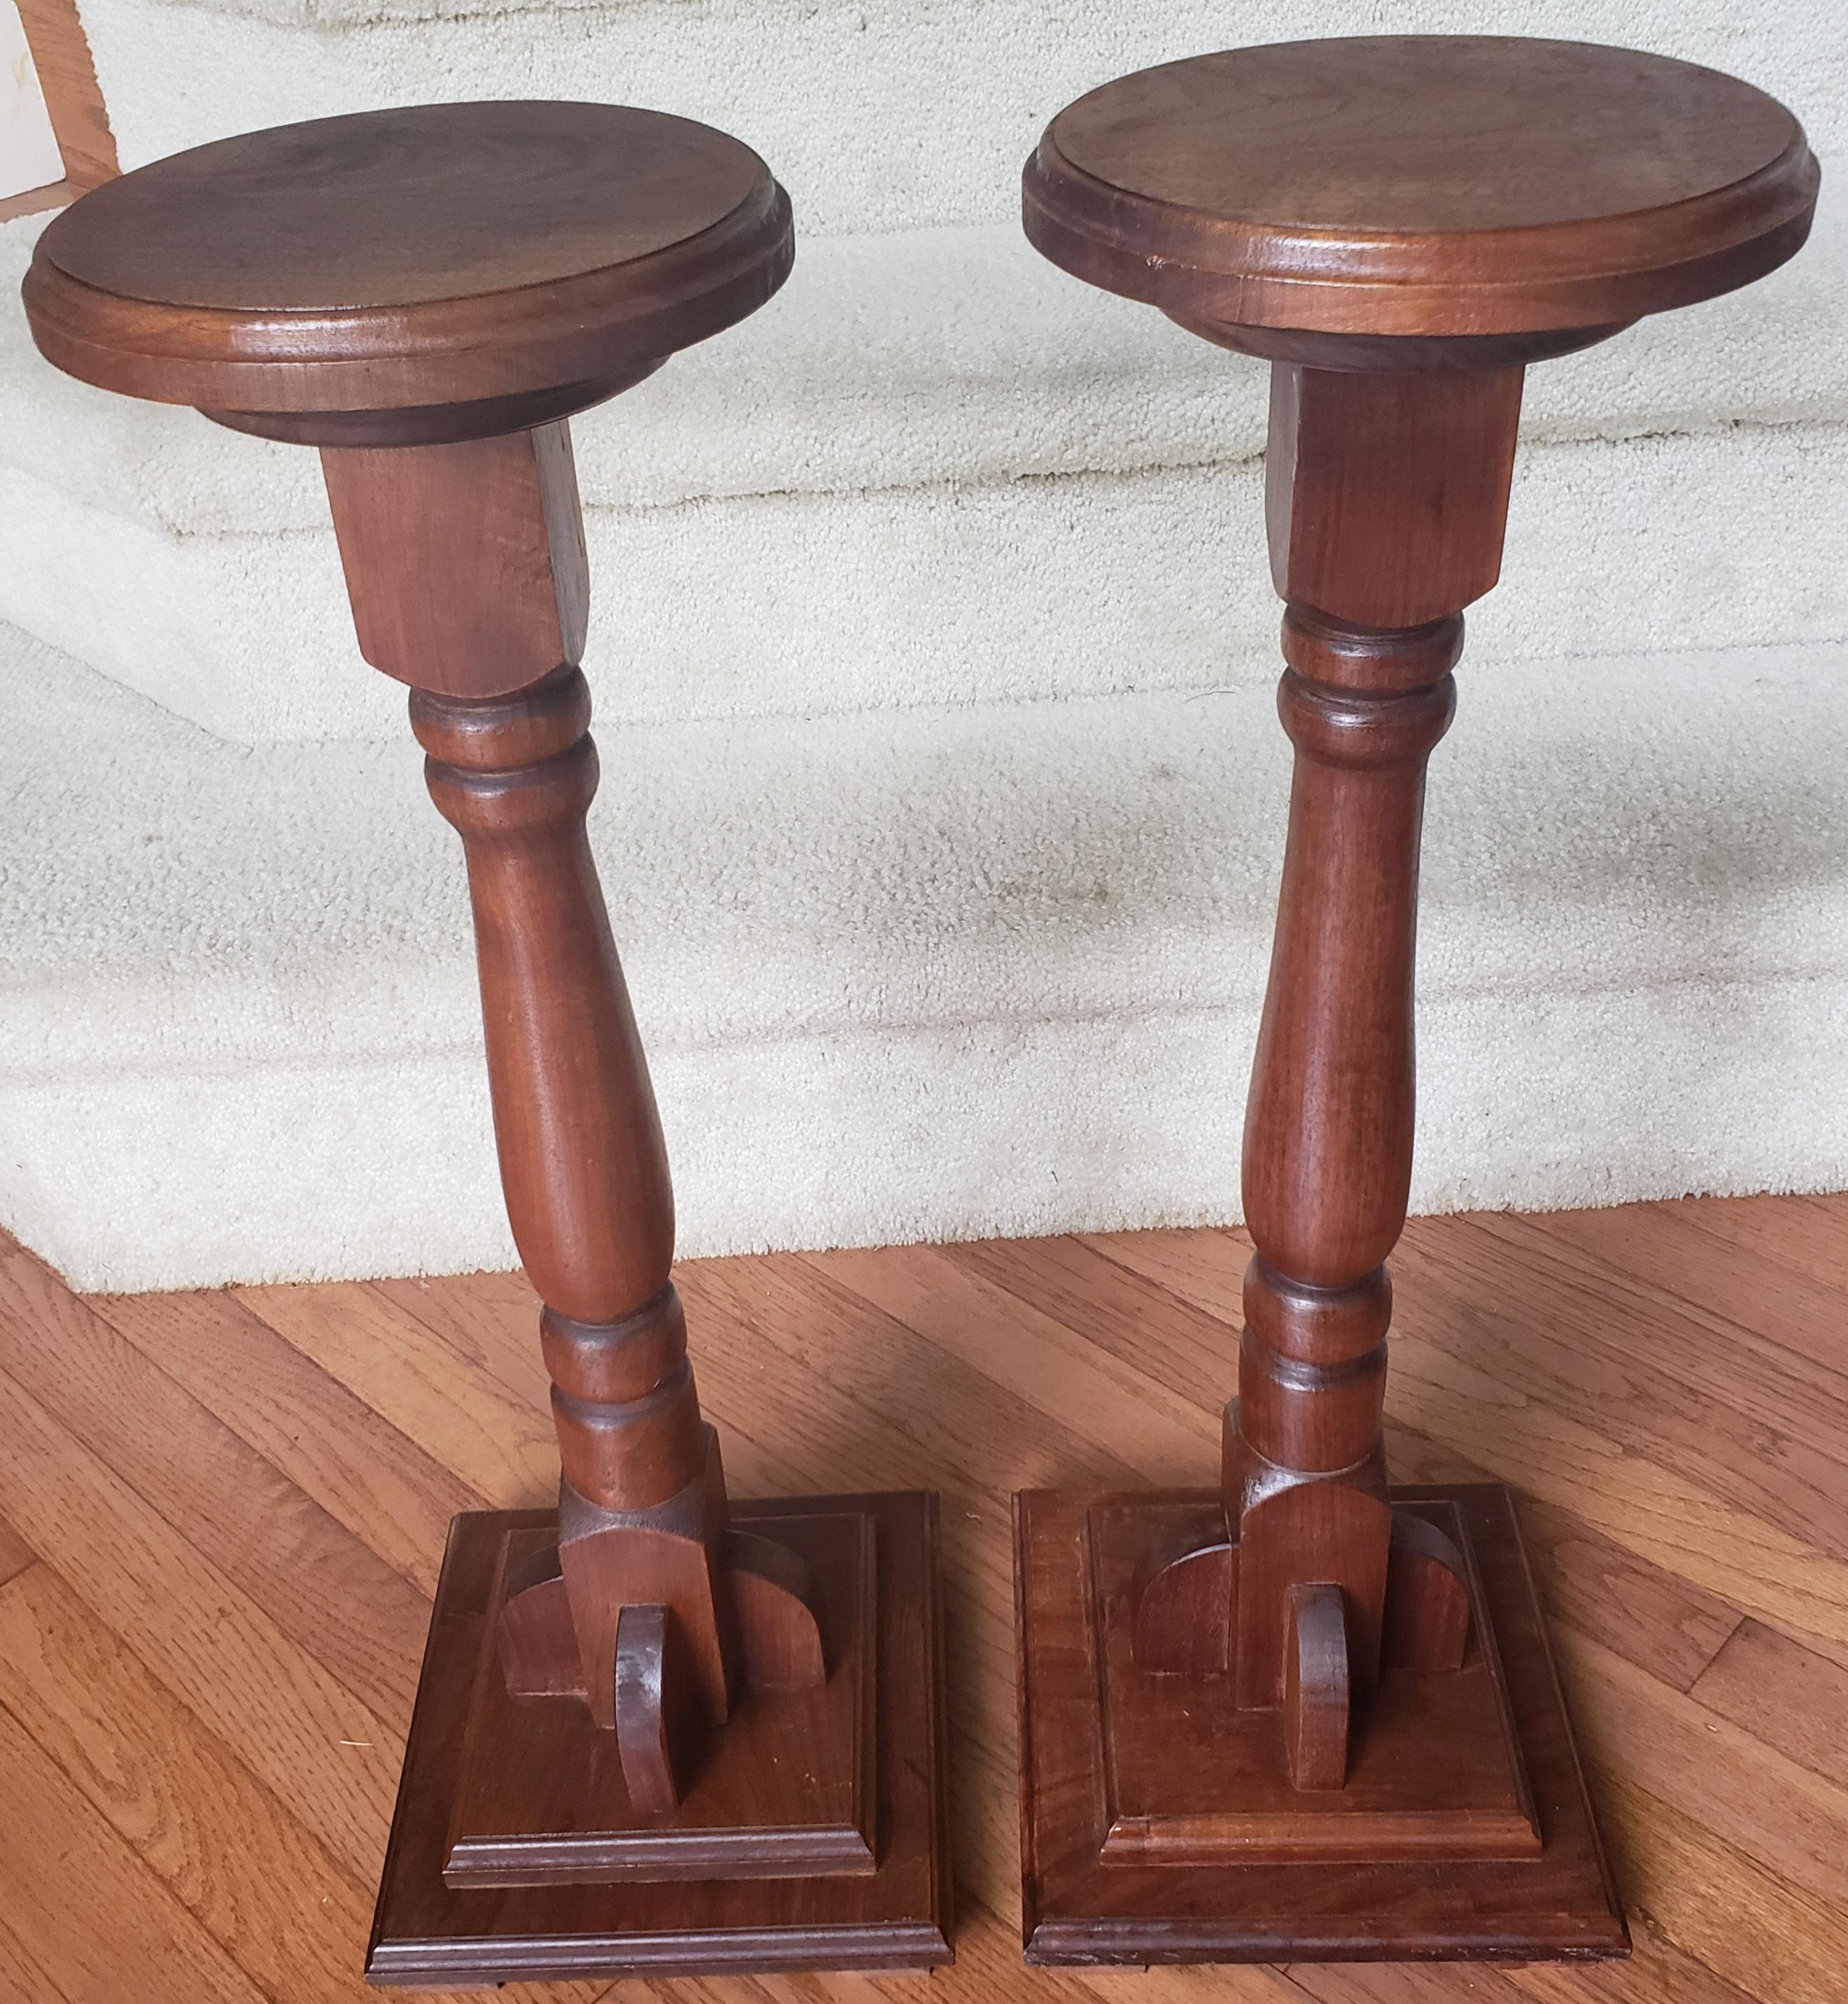 For your consideration is a pair of vintage torcheres in the Victorian taste, mahogany pedestal plant stand columns dating to the late 20th century. Attractive color and graining to the solid mahogany Of quality craftsmanship with a polished finish